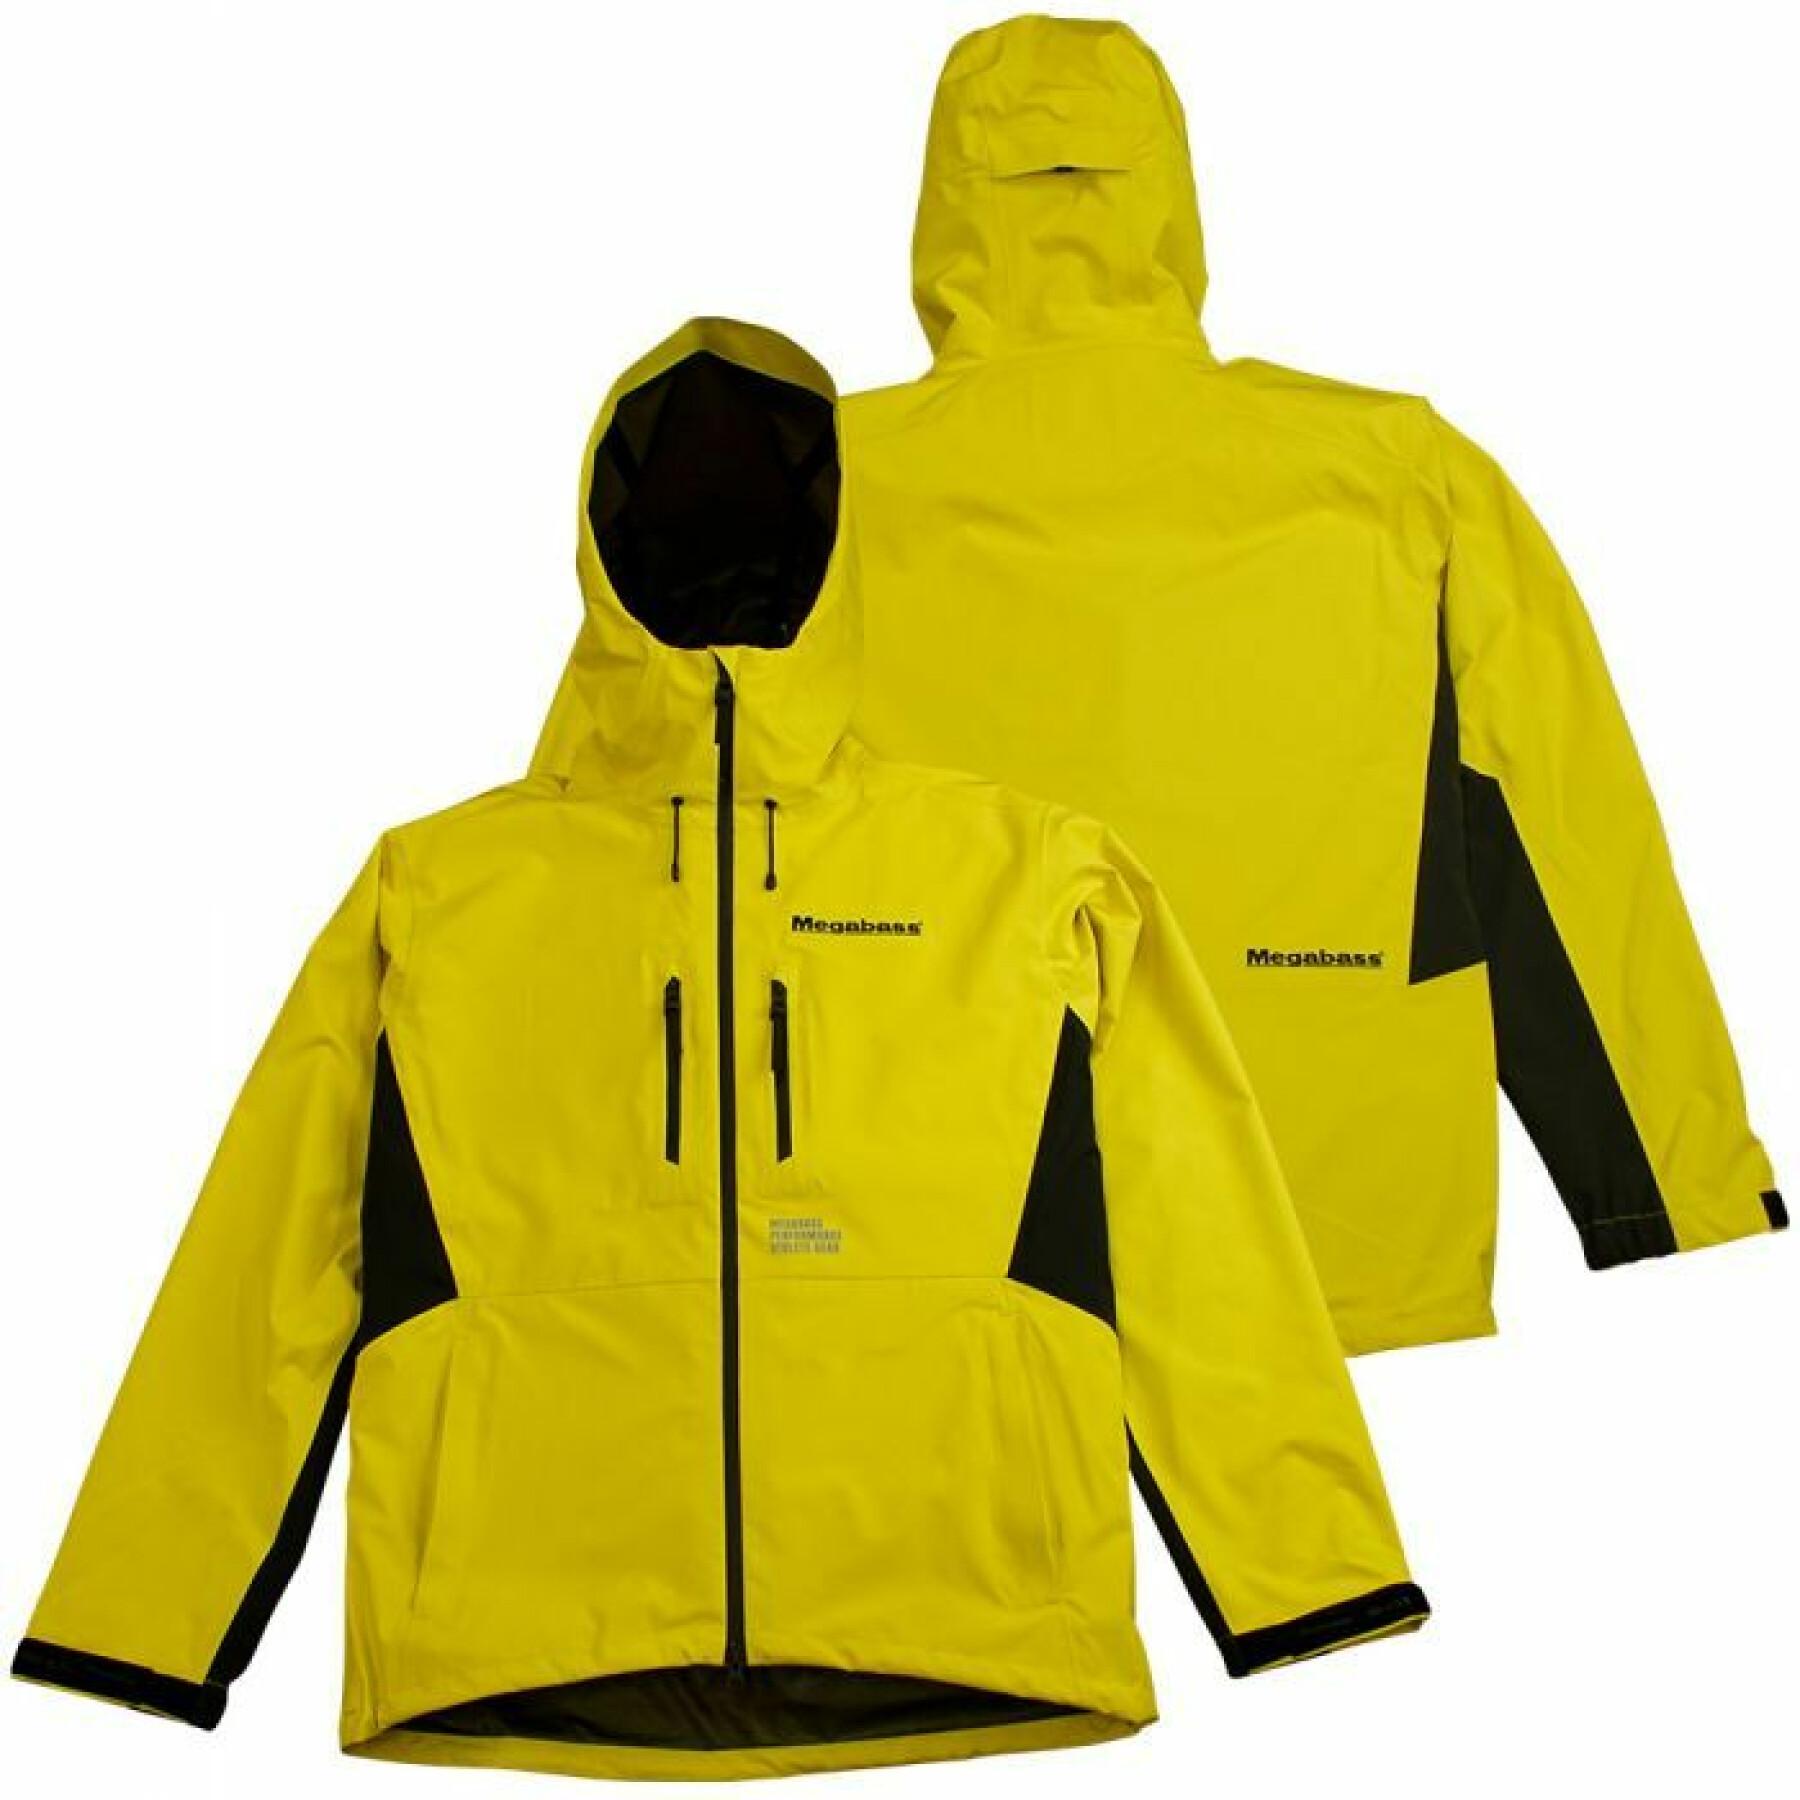 Chaqueta impermeable Megabass Wilderness Competition